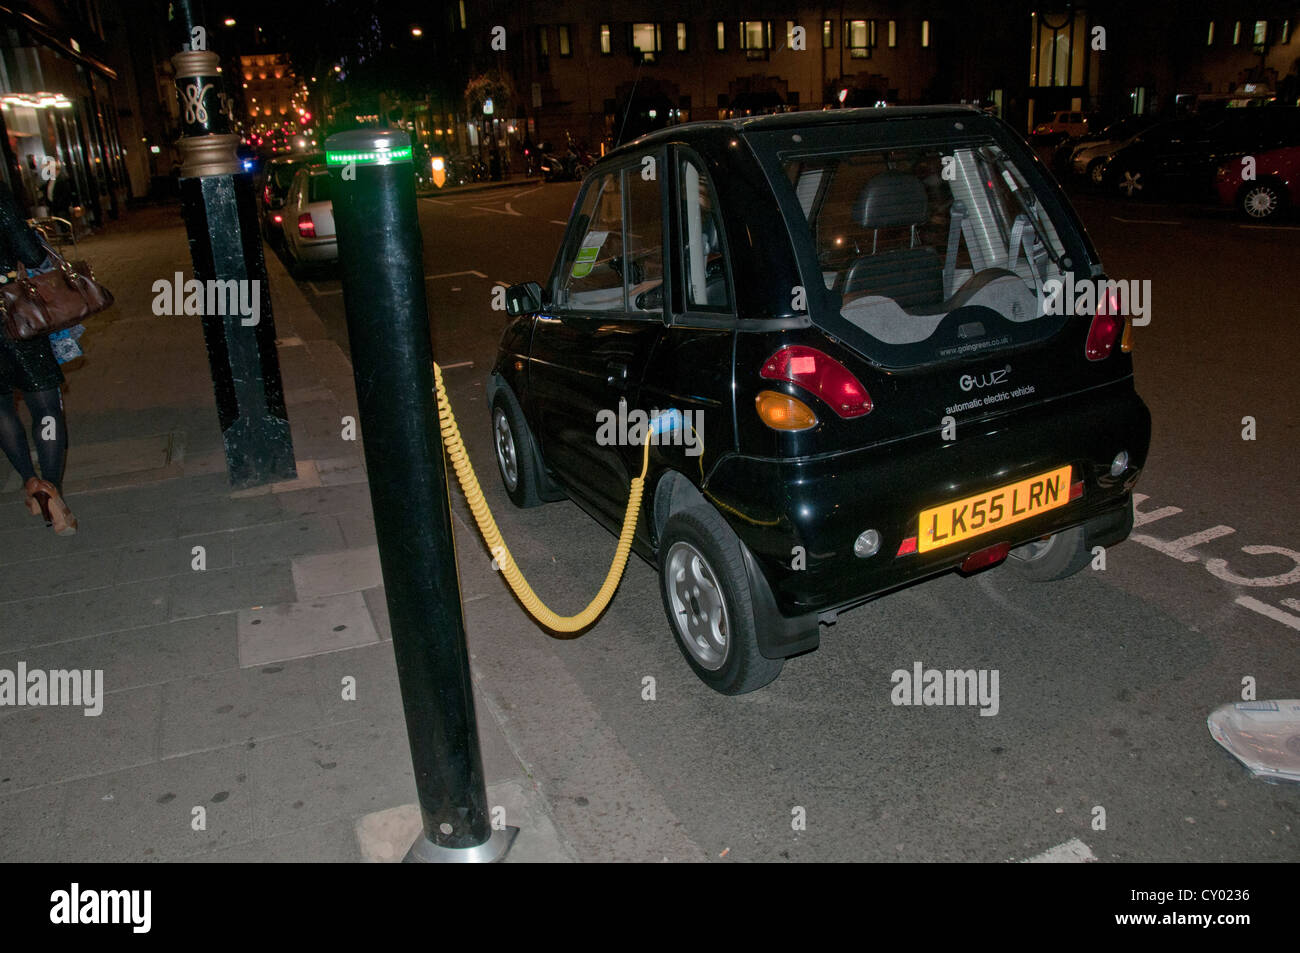 An electric G-Wiz car on charge in central London at night Stock Photo